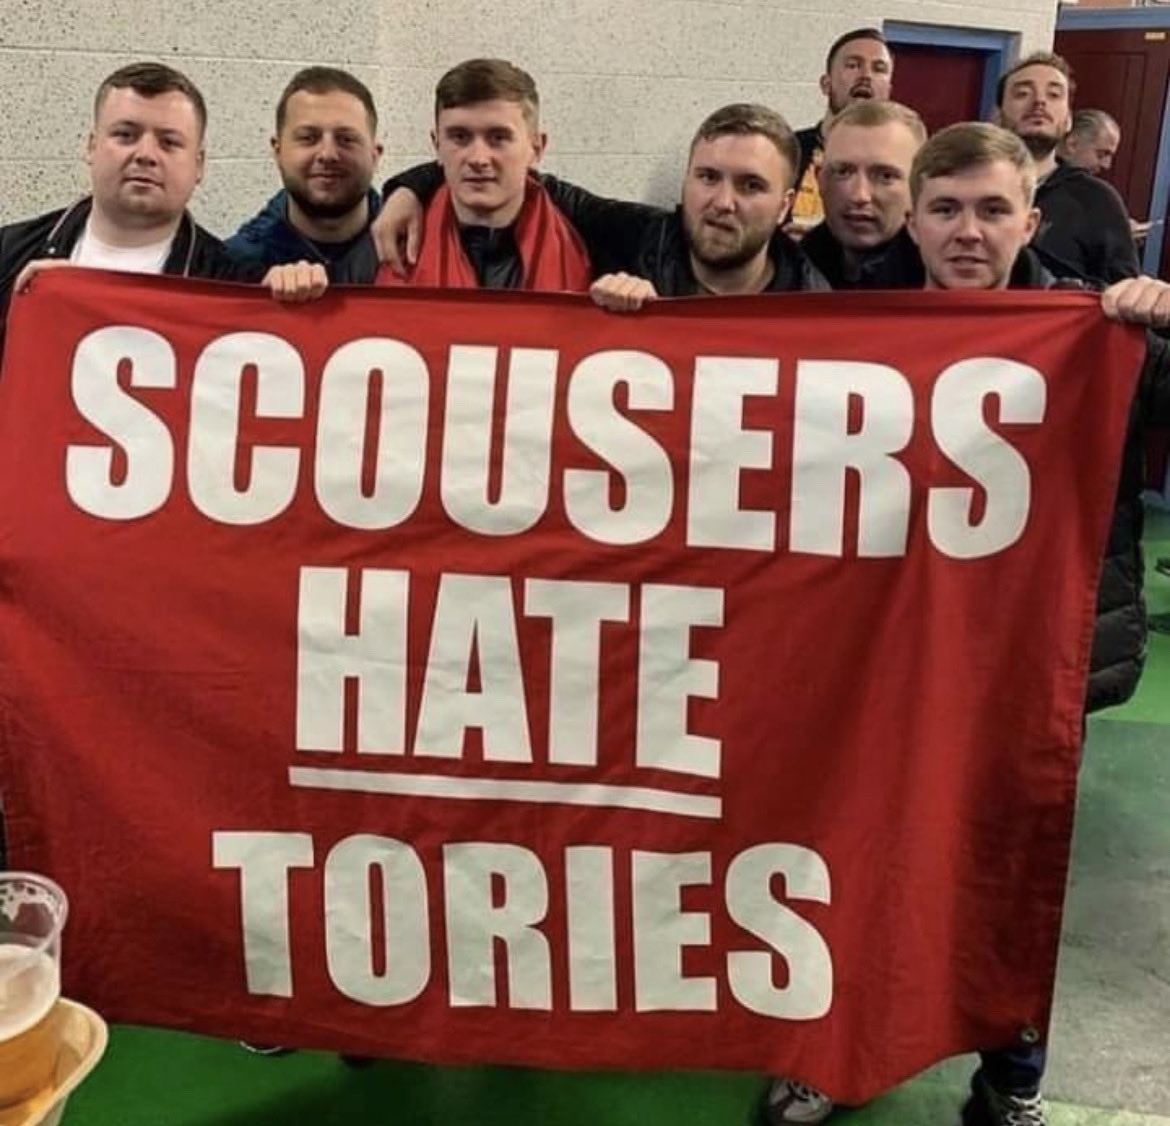 I’m with the Scousers